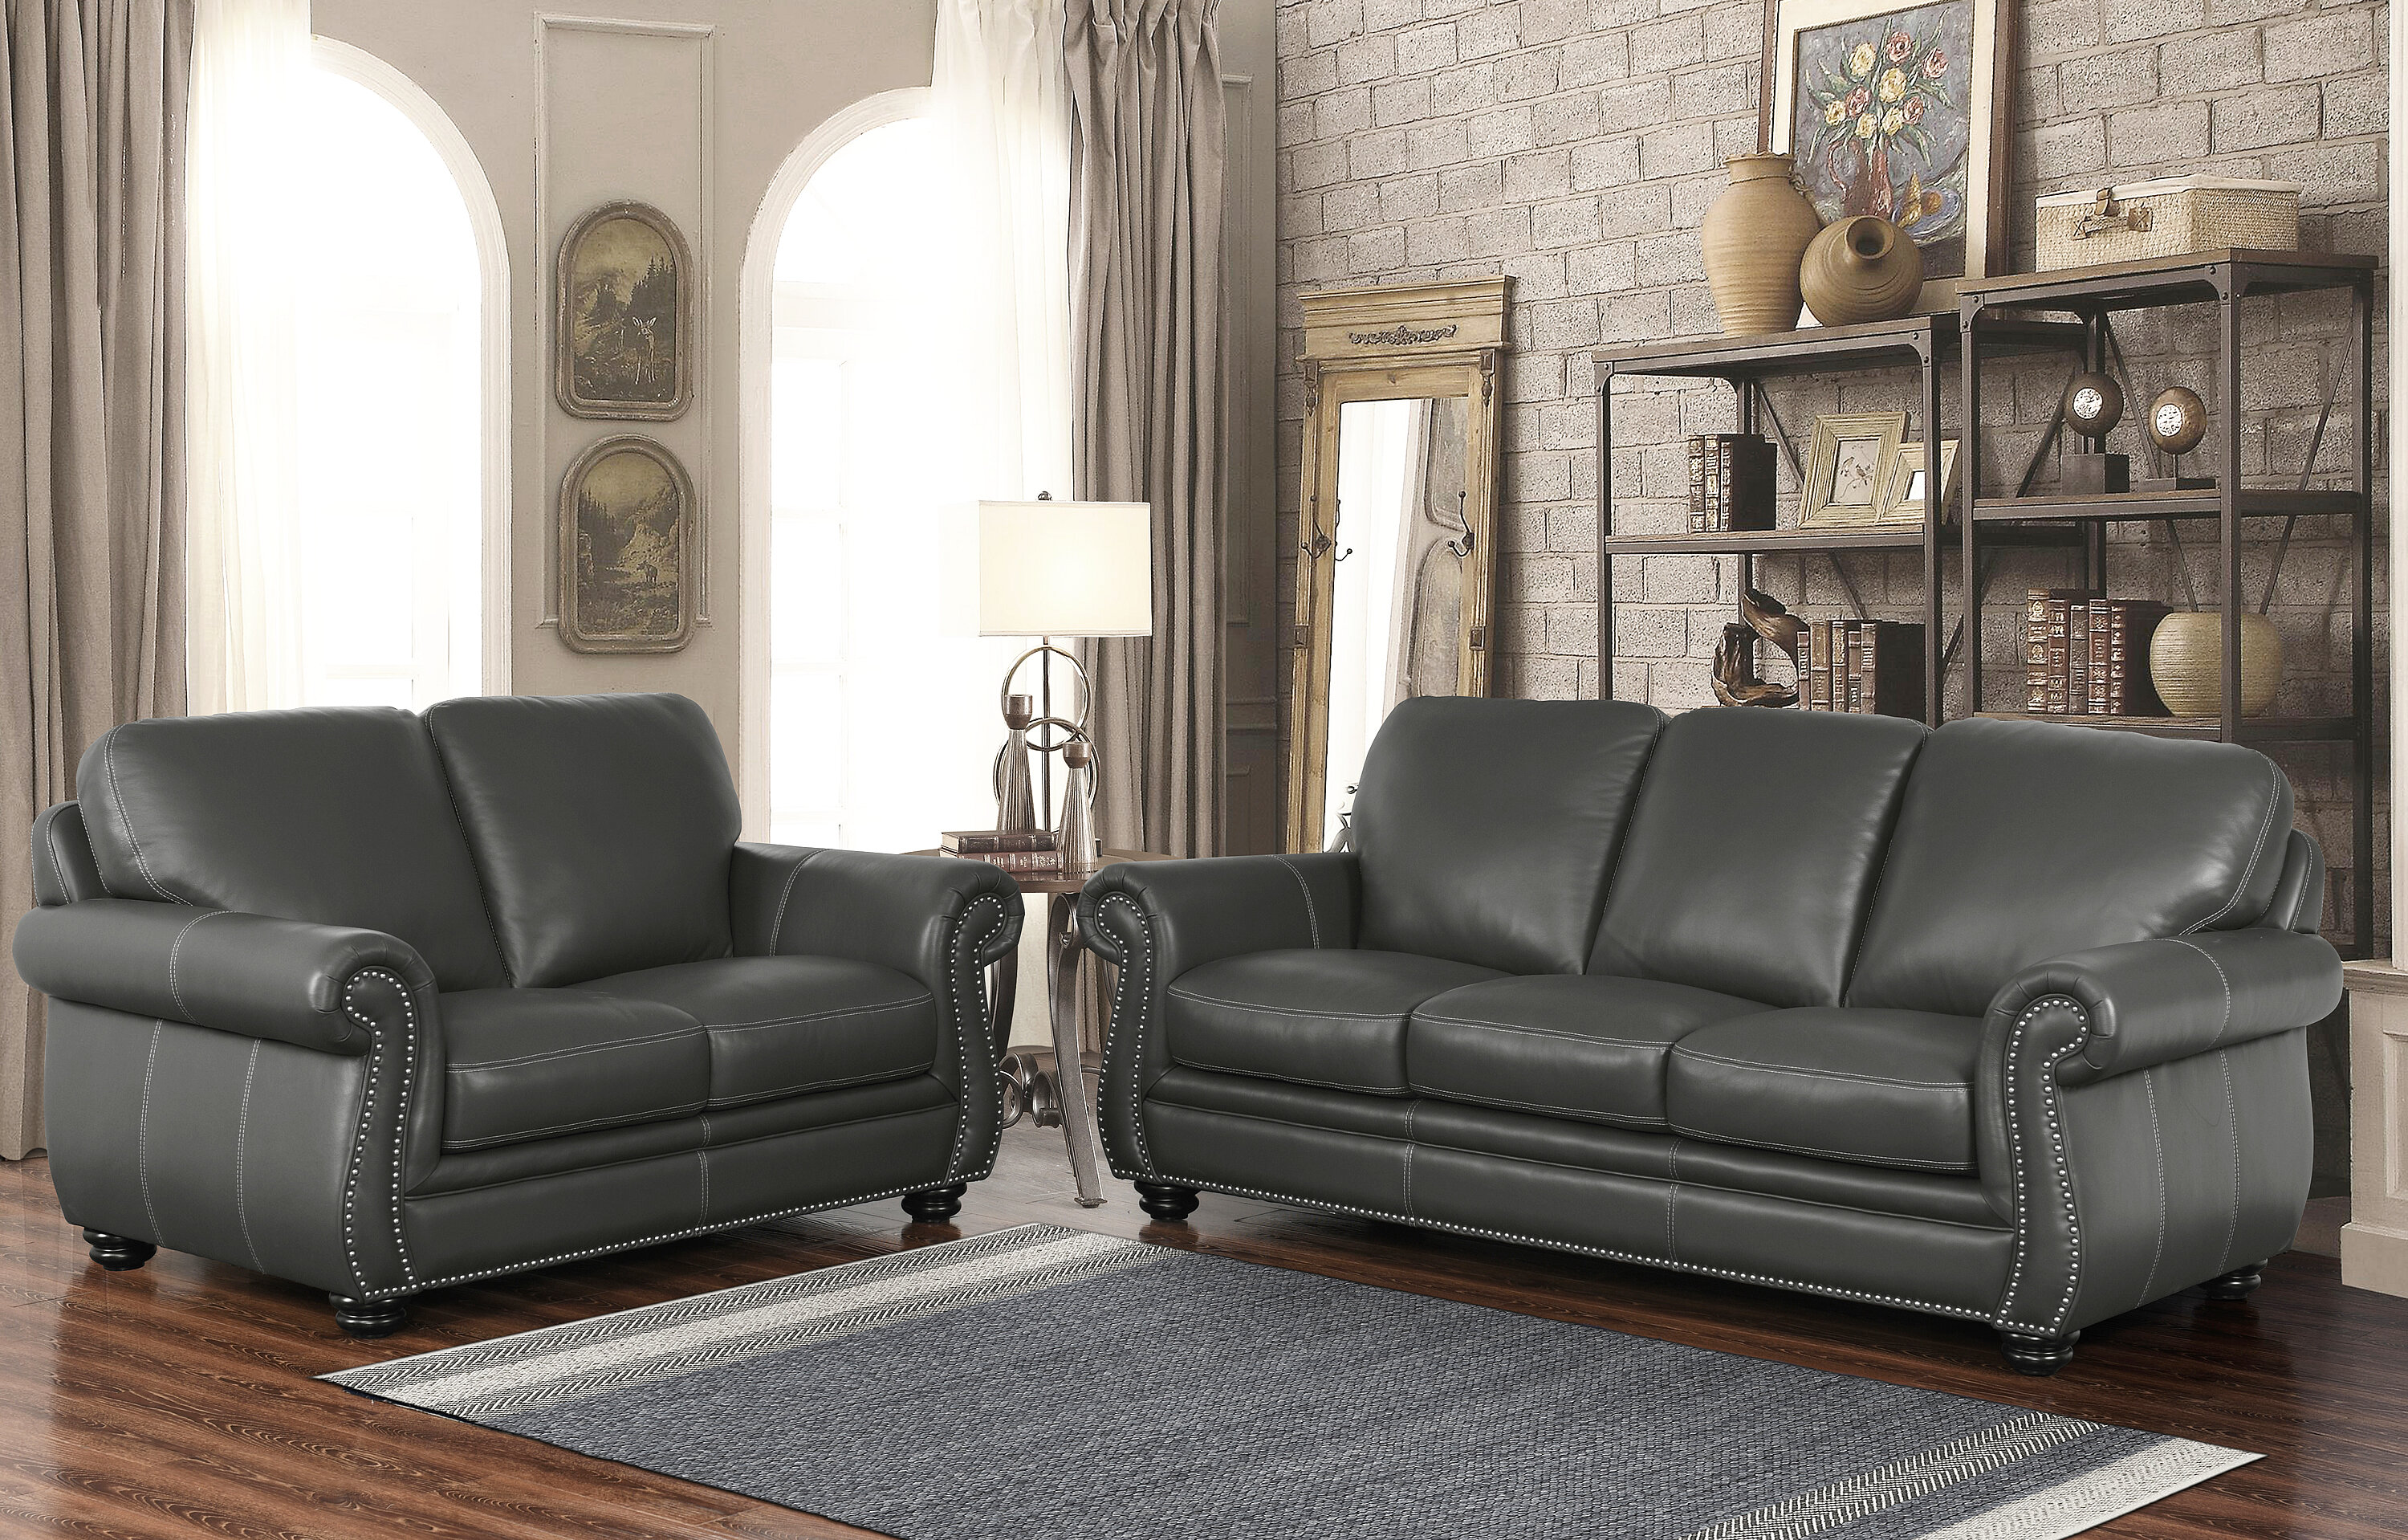 Darby Home Co Fairdale 2 Piece Leather Living Room Set Reviews Wayfairca